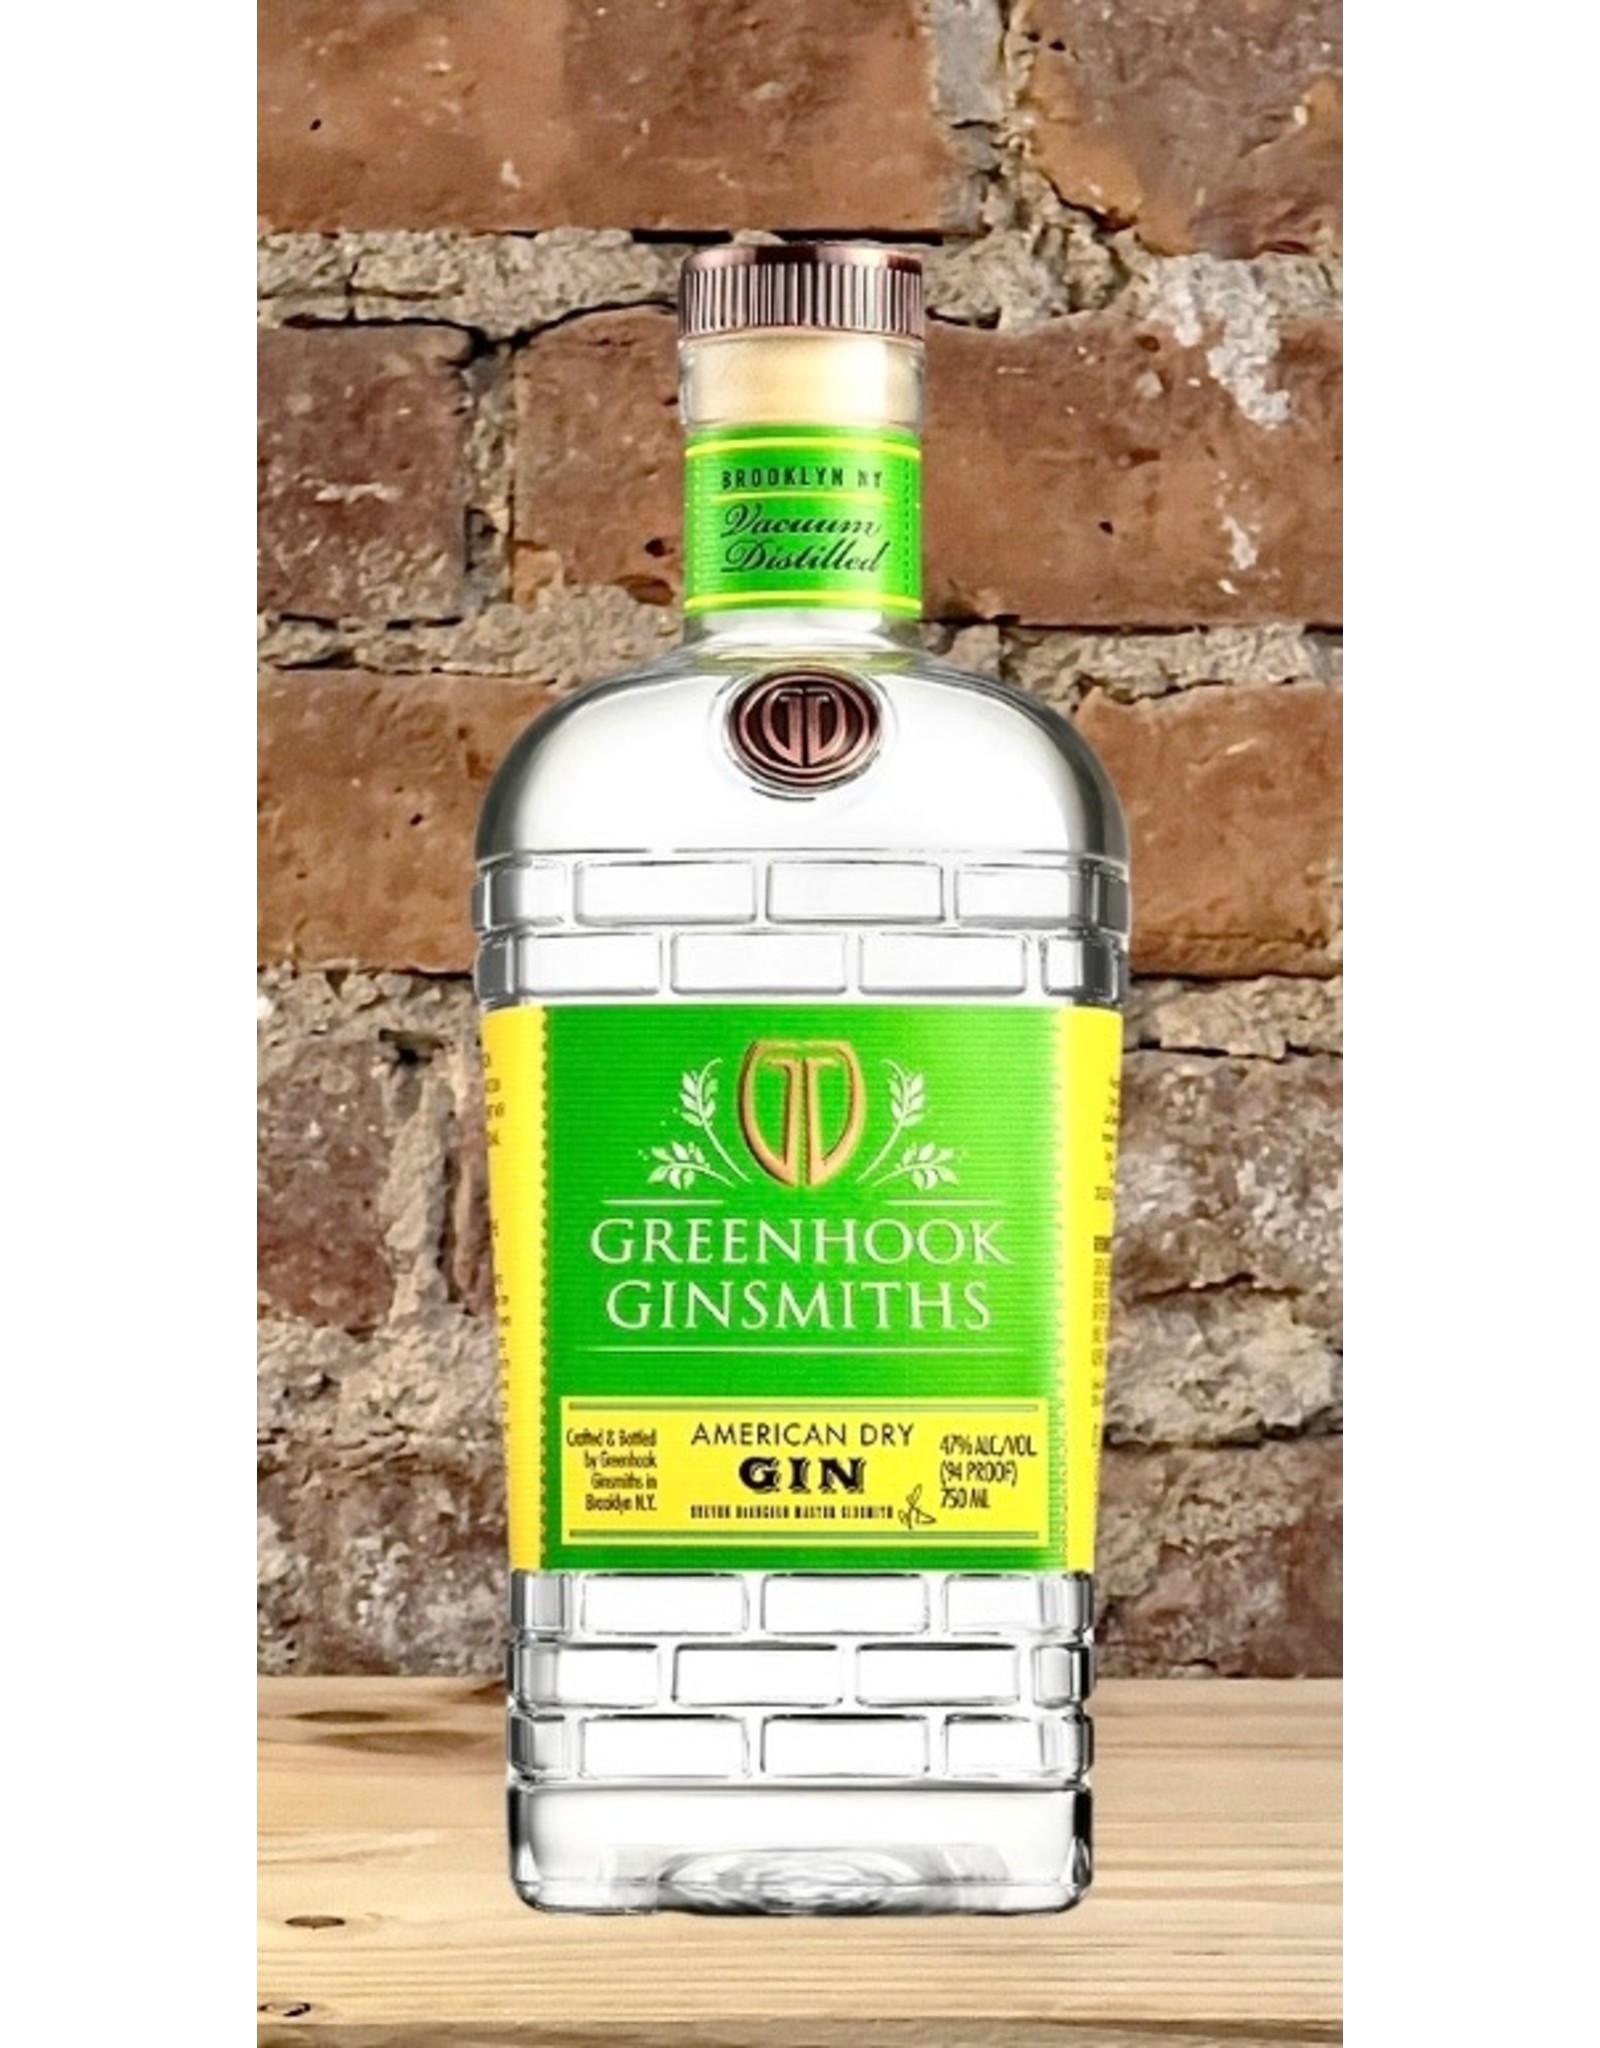 Gin, American Dry, Greenhook Ginsmiths 47%